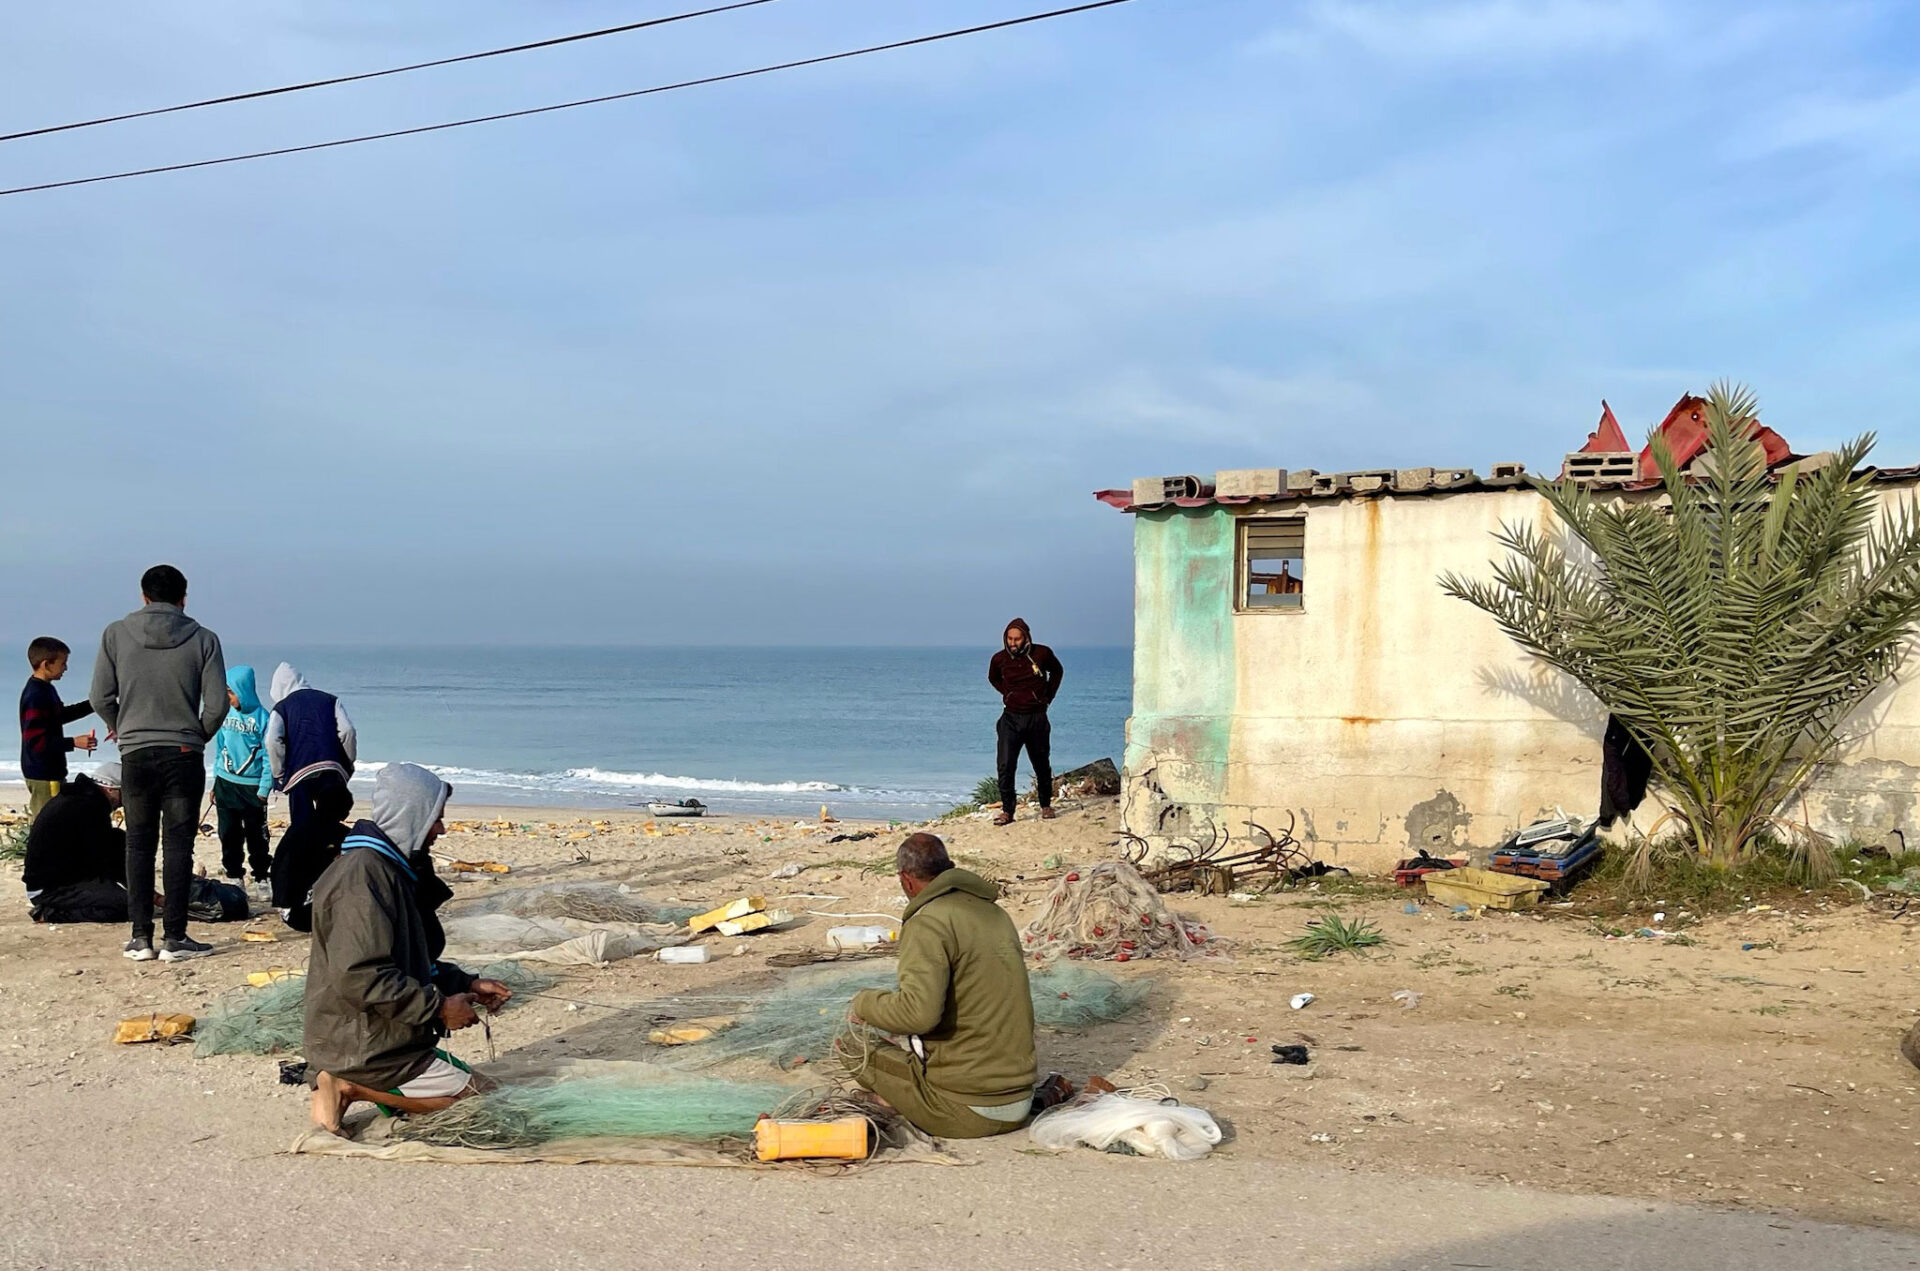 Men work on a fishing net by the sea shore.